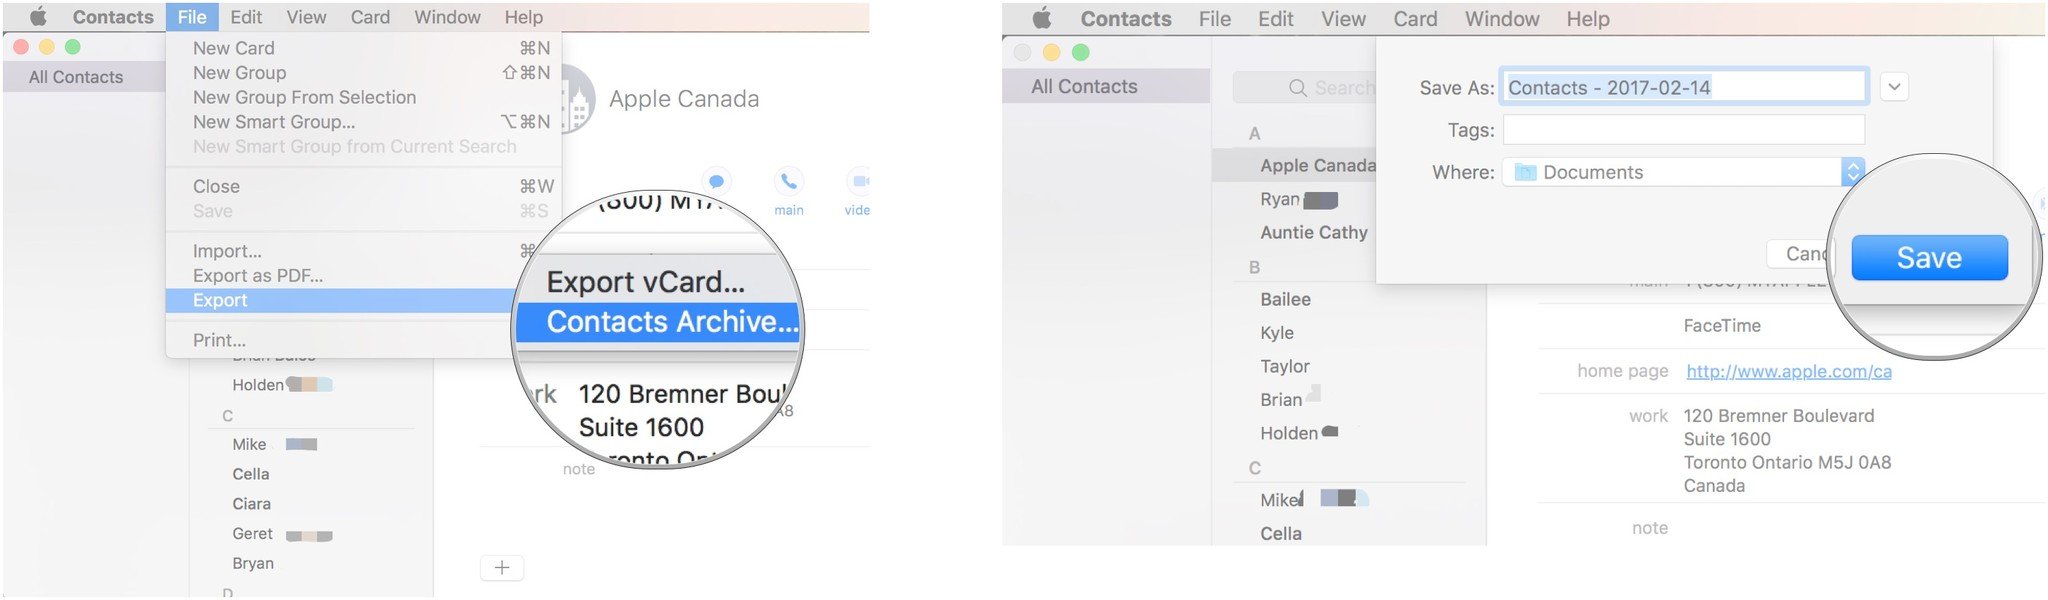 To manually back up contacts by exporting them, click File, Export, Contacts Archive, name the file, and click save.